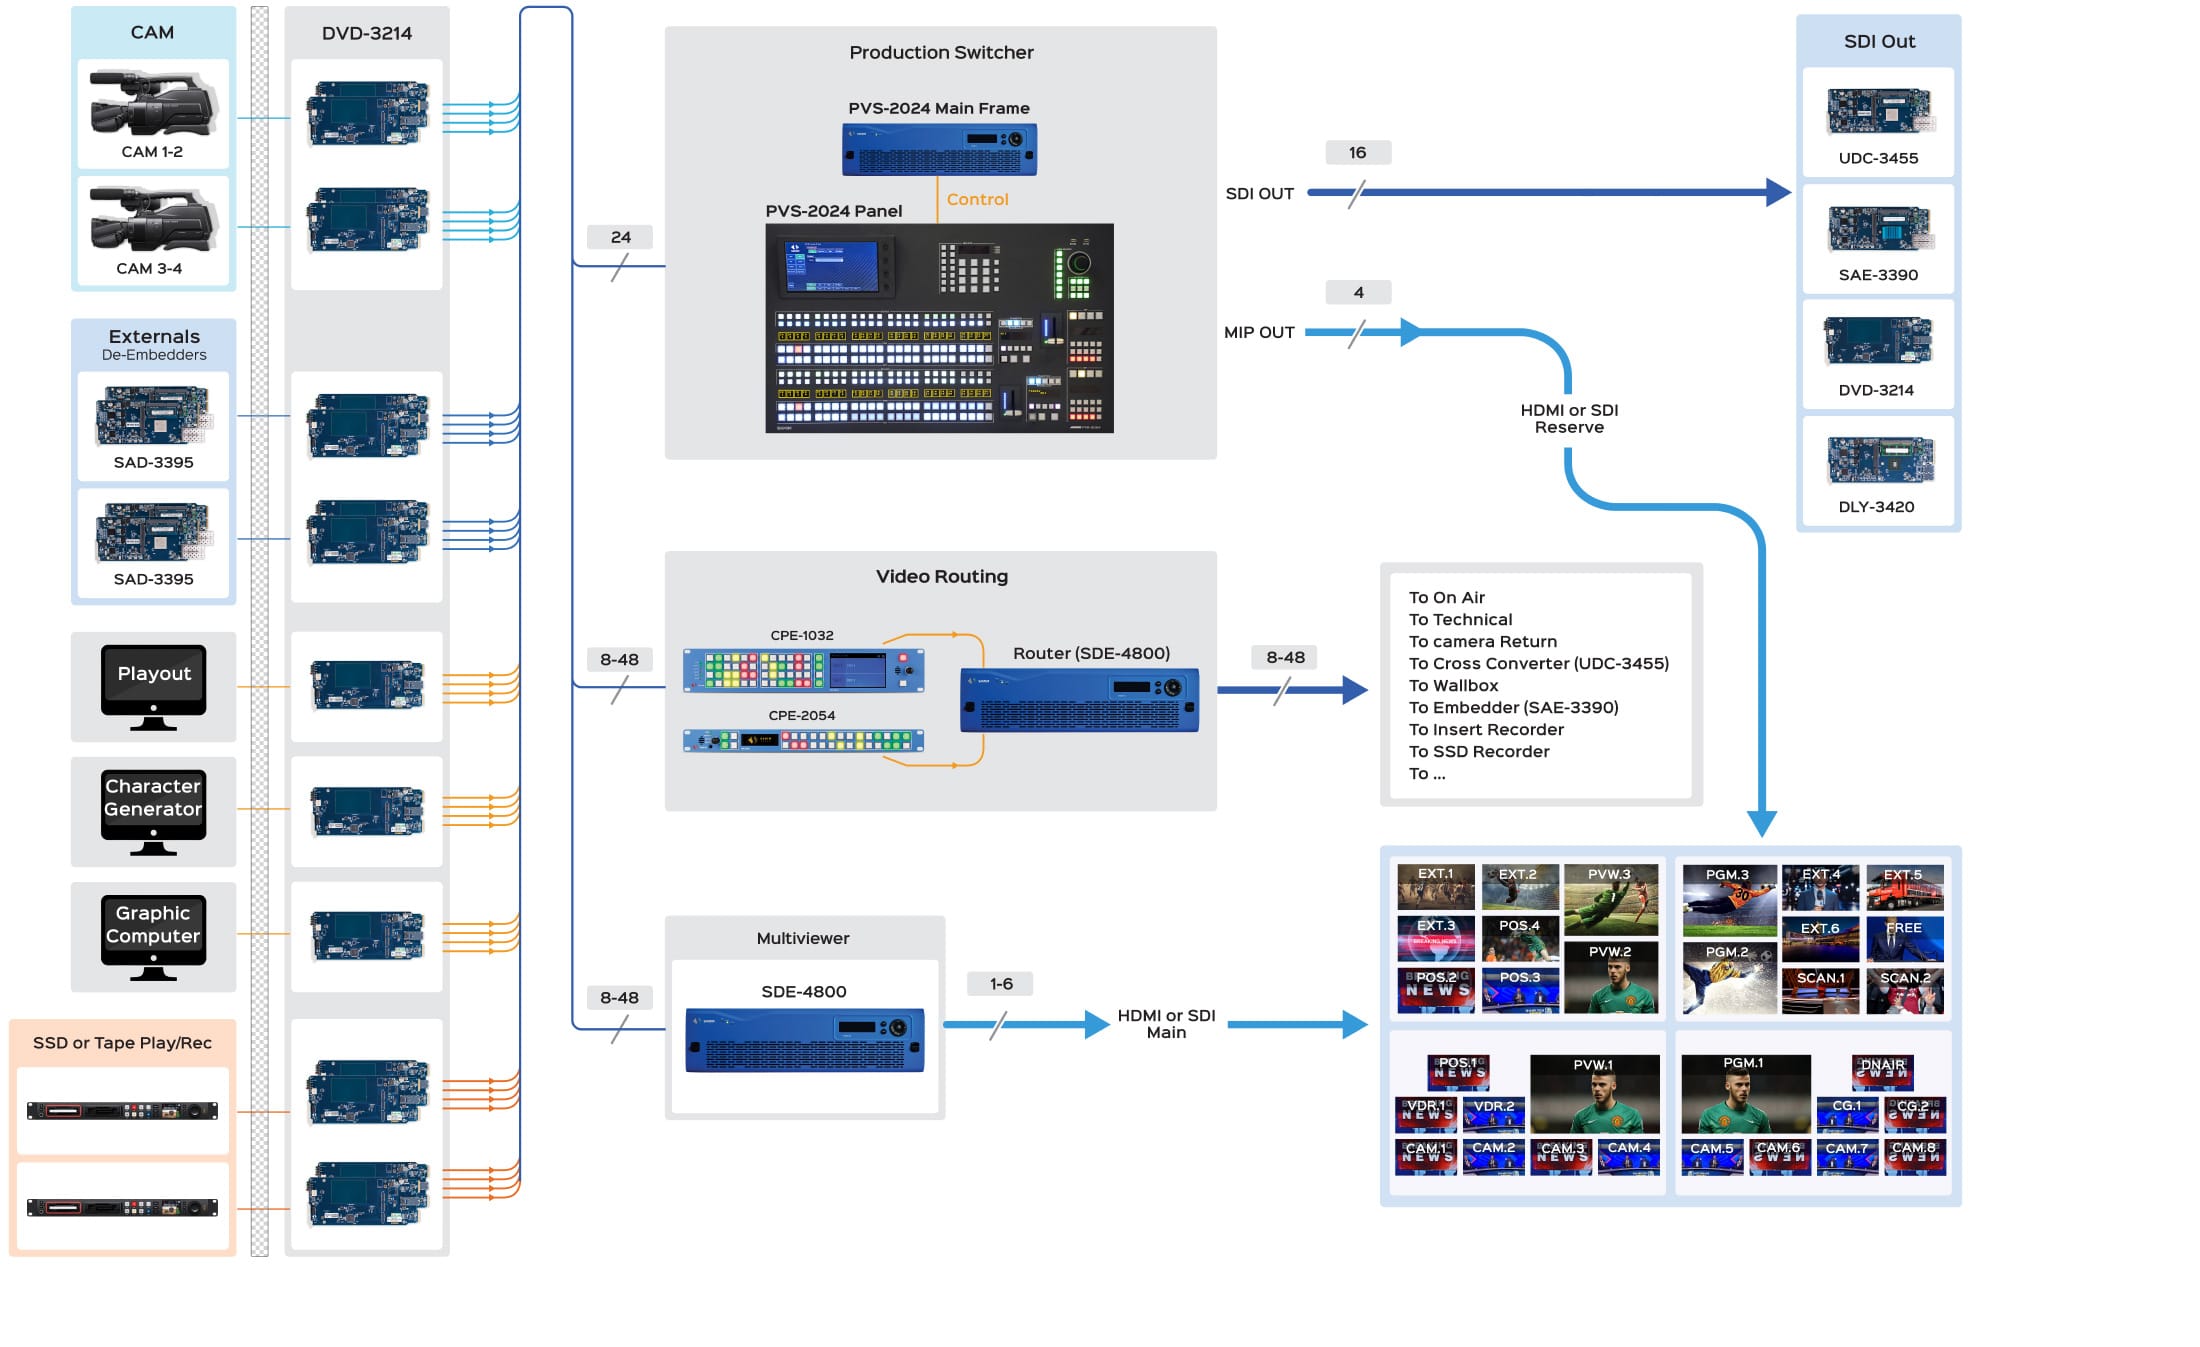 Diagram of Samim products and Solutions Usage in Live Production Studios